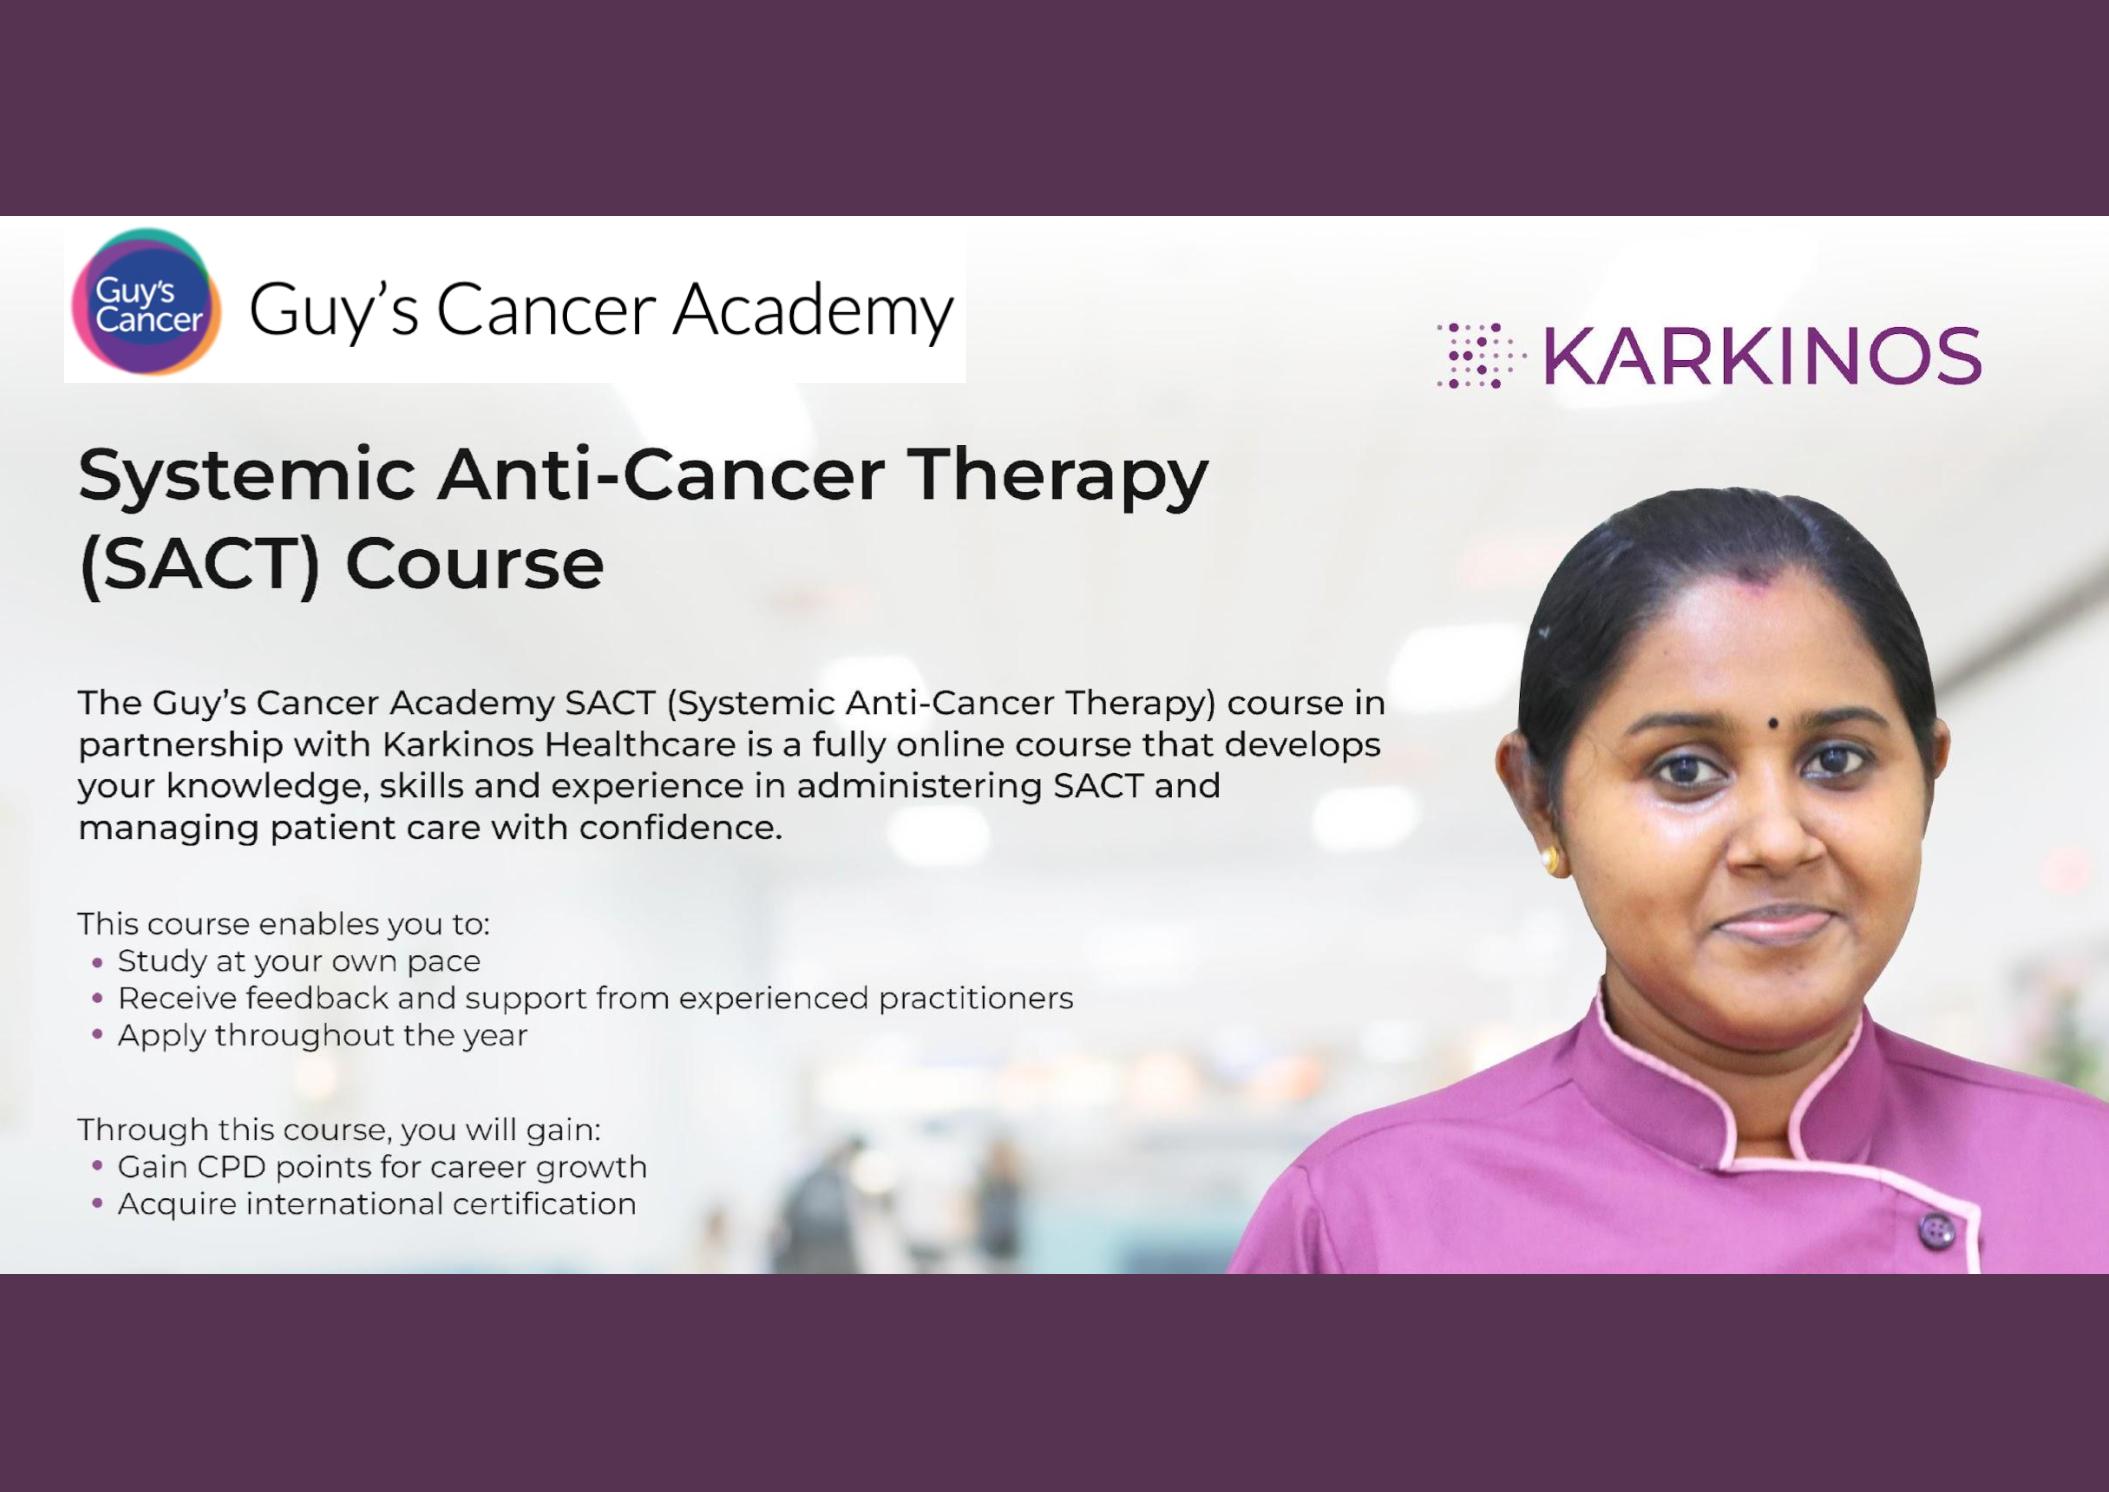 Guy's Cancer Academy's Systemic Anti-Cancer Therapy Course with Karkinos Healthcare